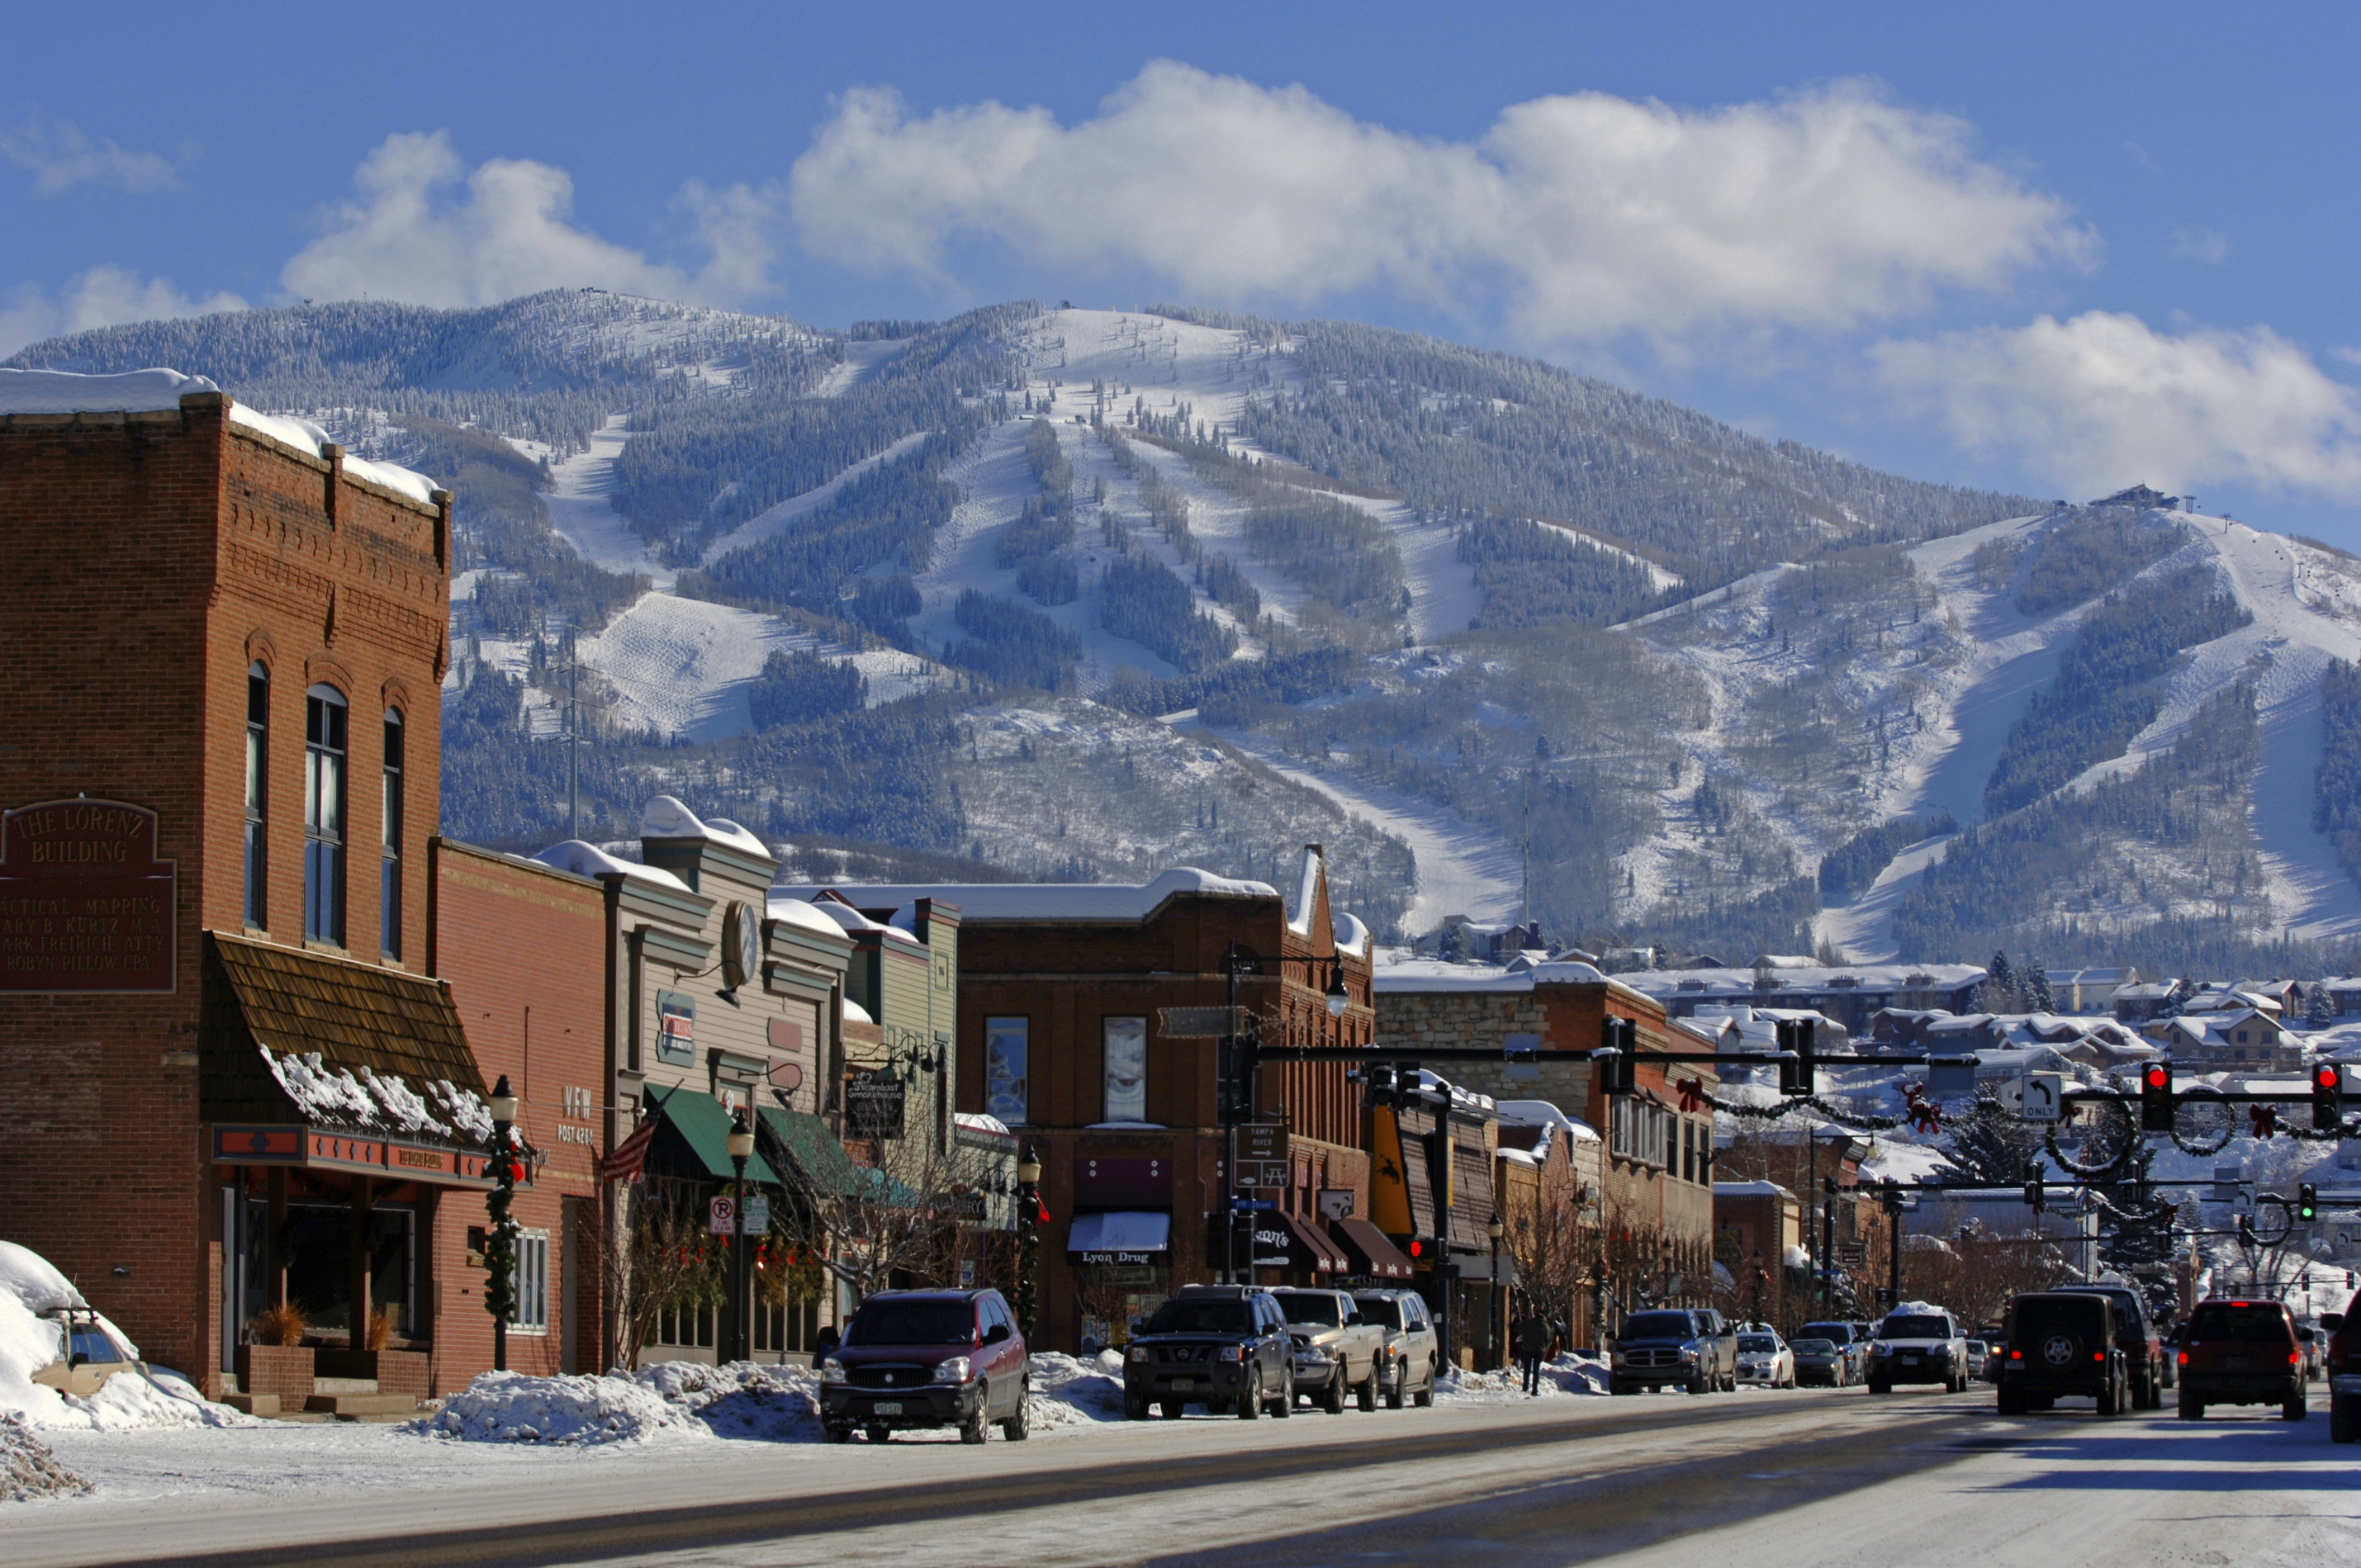 5 Things We Love About Steamboat Springs Get Discount Lift Tickets at